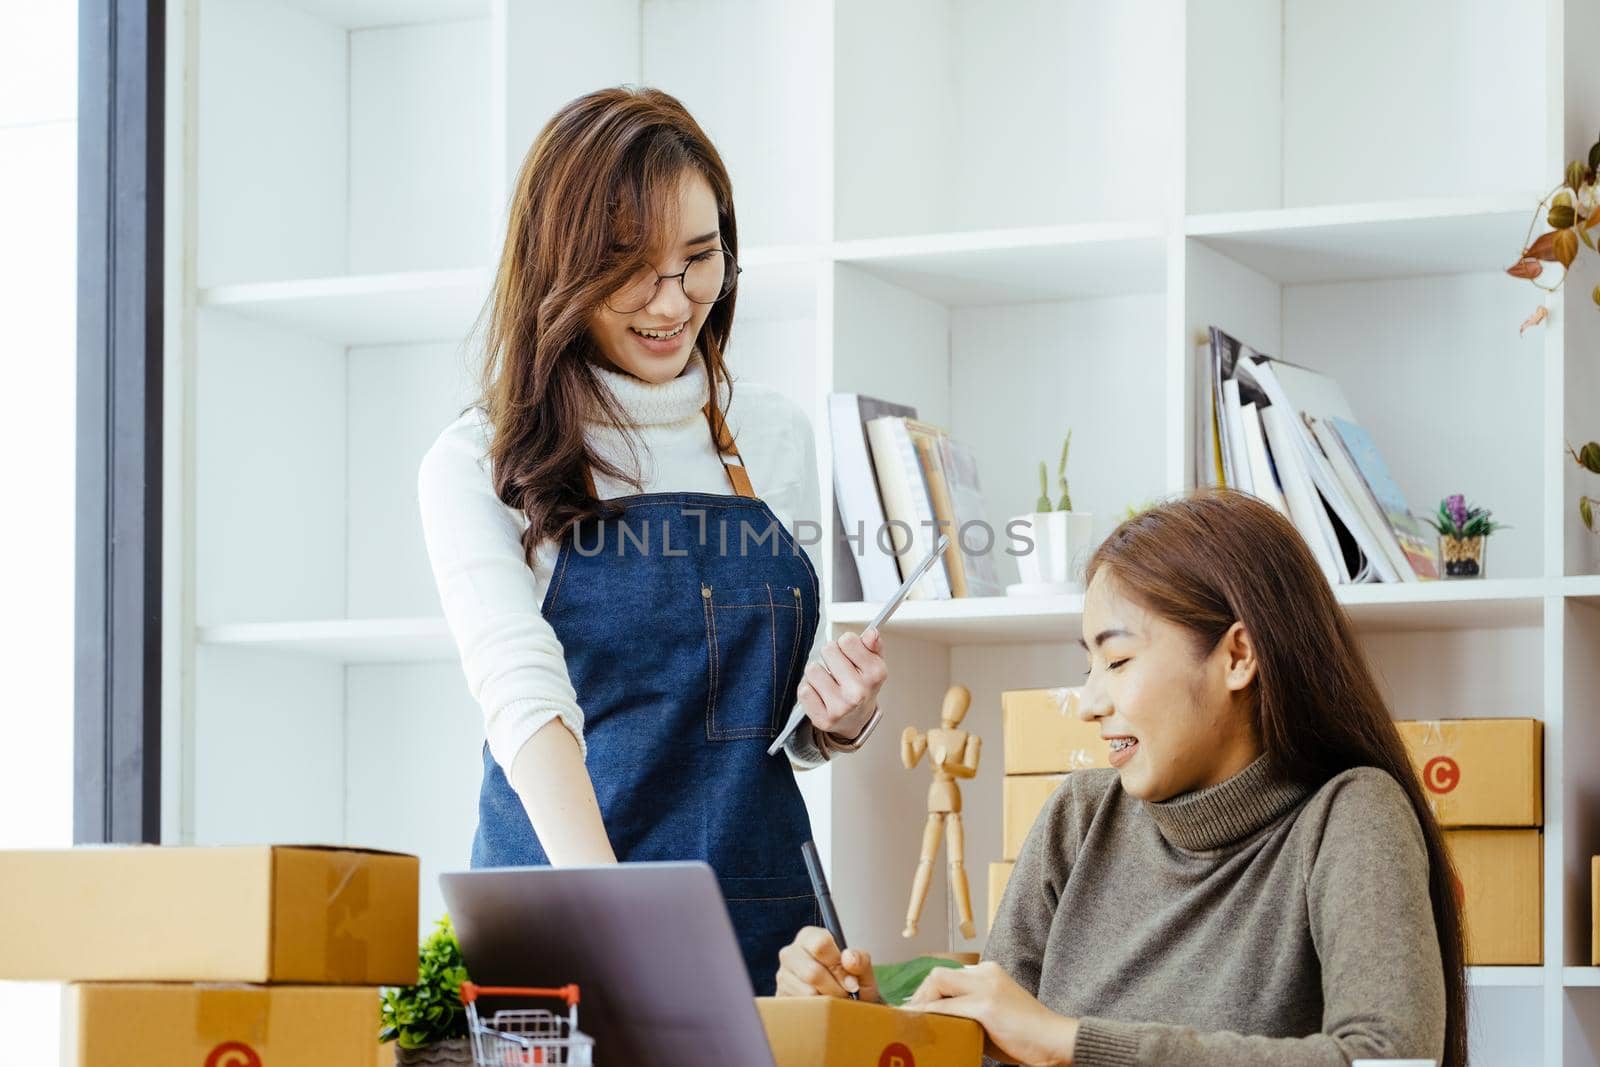 selling products online, the focus is on the face of a woman in white pointing to a friend to write down the shipping address for the customer and prepare it for postage